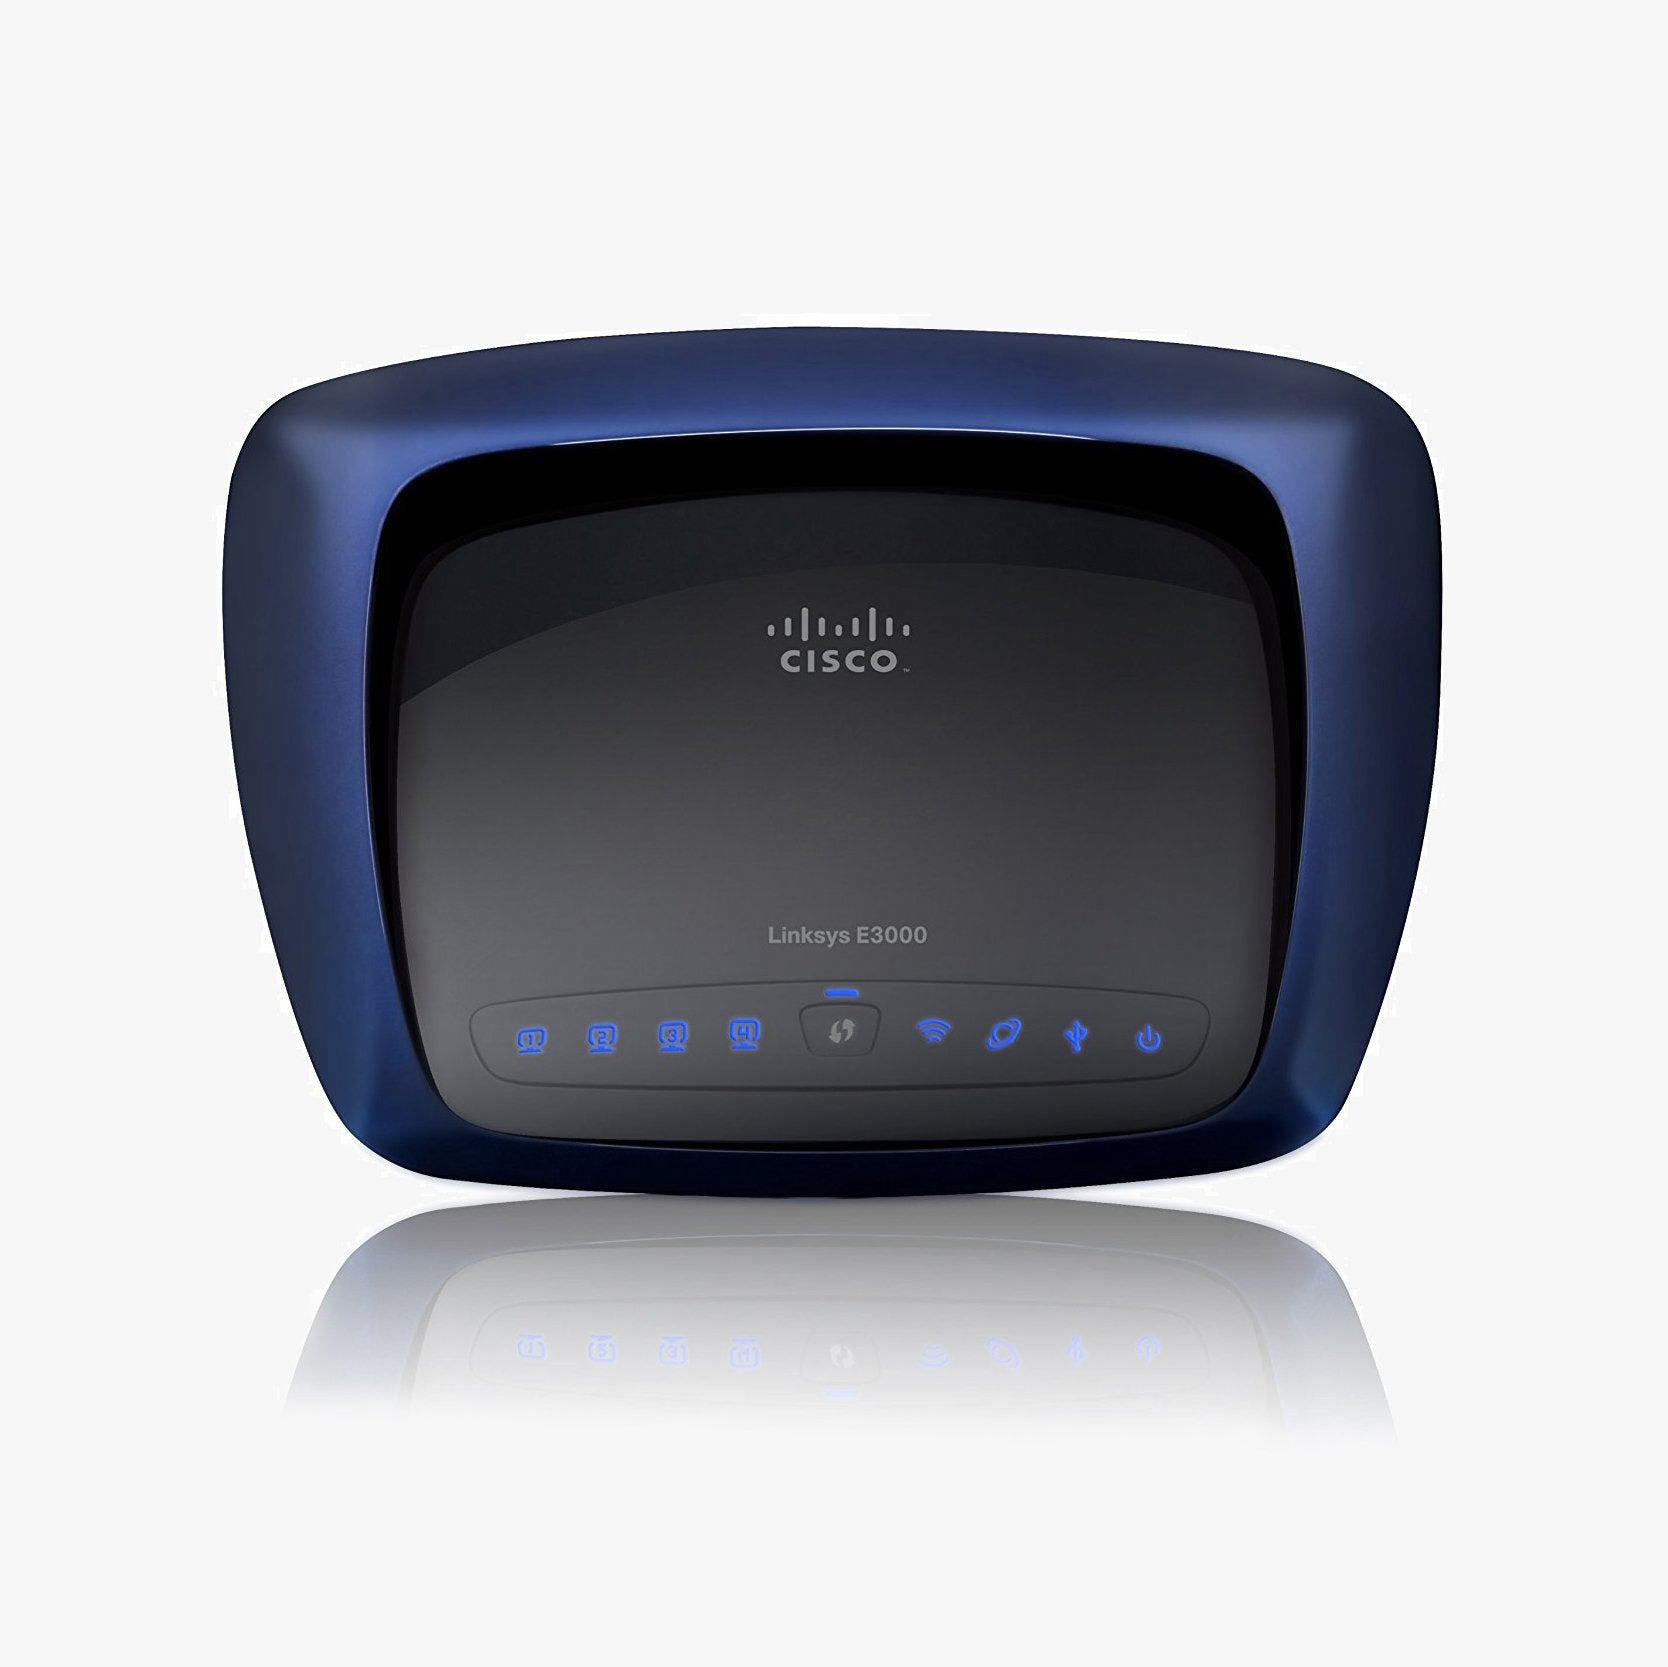 Cisco-Linksys E3000 Dual-Band Wireless-N Router